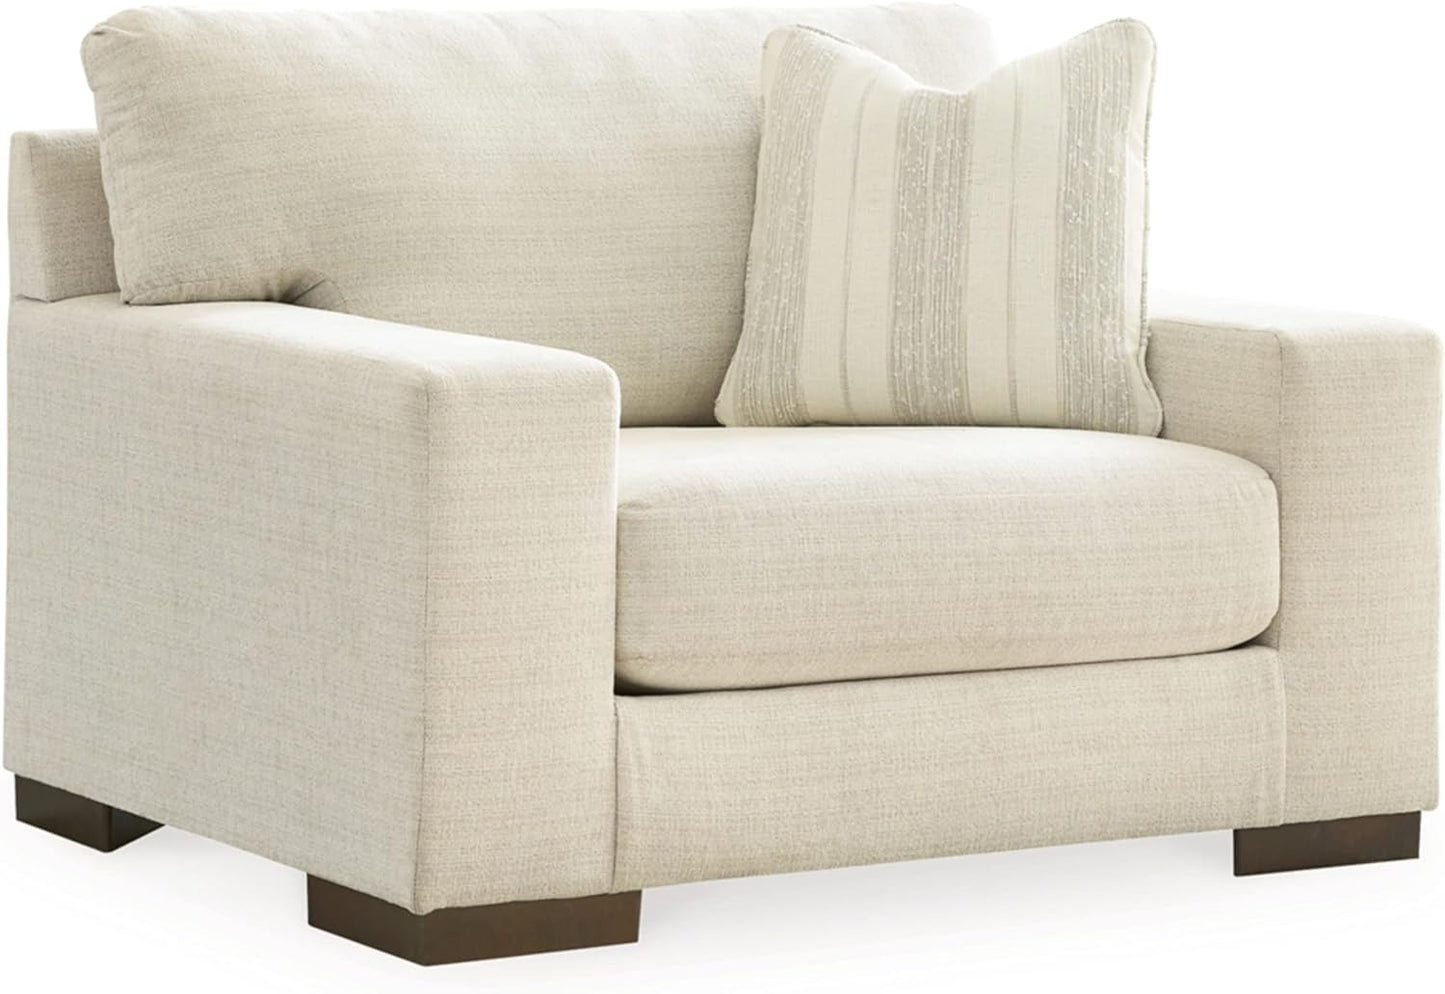 Like NEW - Signature Design by Ashley Maggie Contemporary Upholstered Chair and a Half, Beige - Retail $596